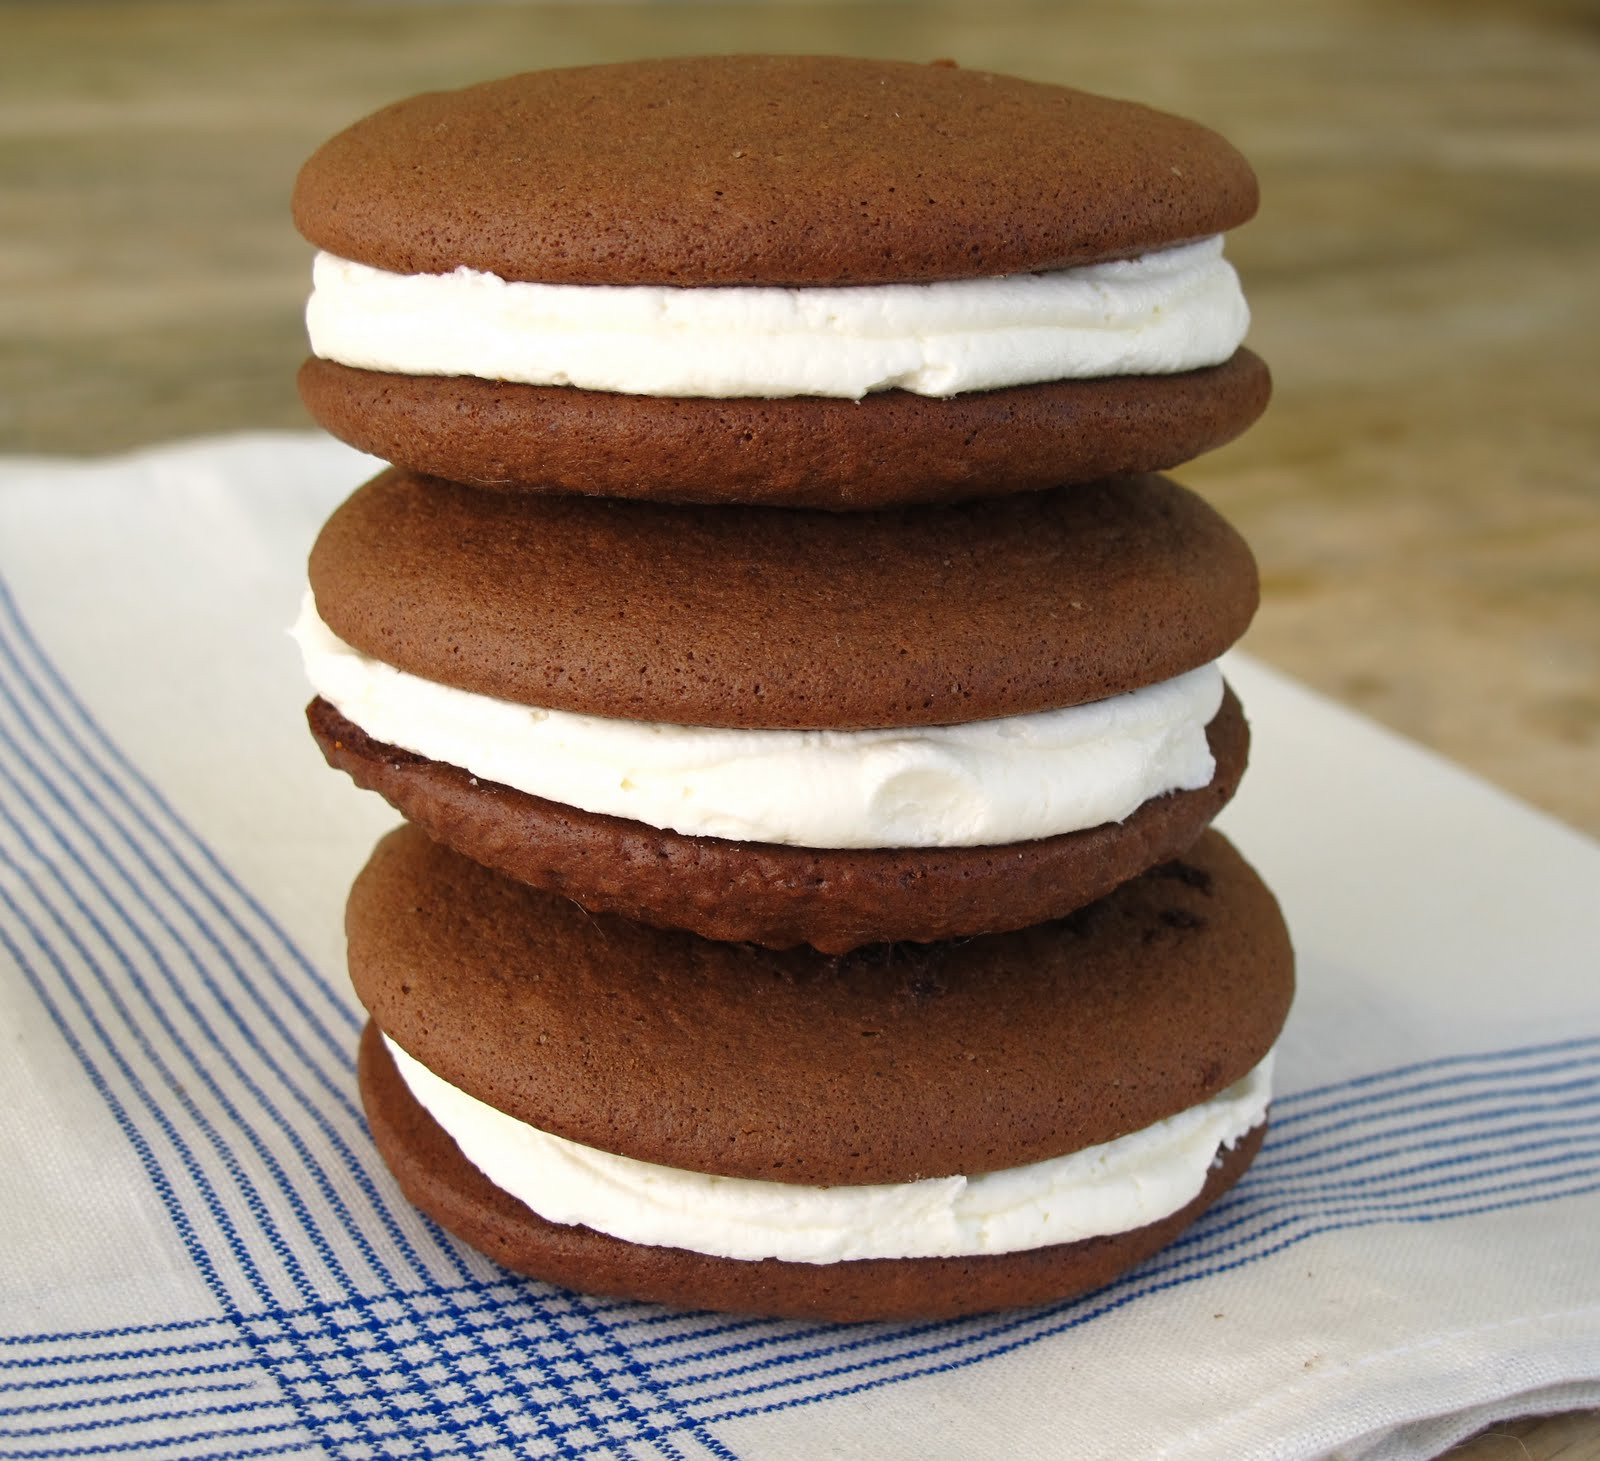 How To Make Whoopie Pies
 whoopie pie recipe with cake mix